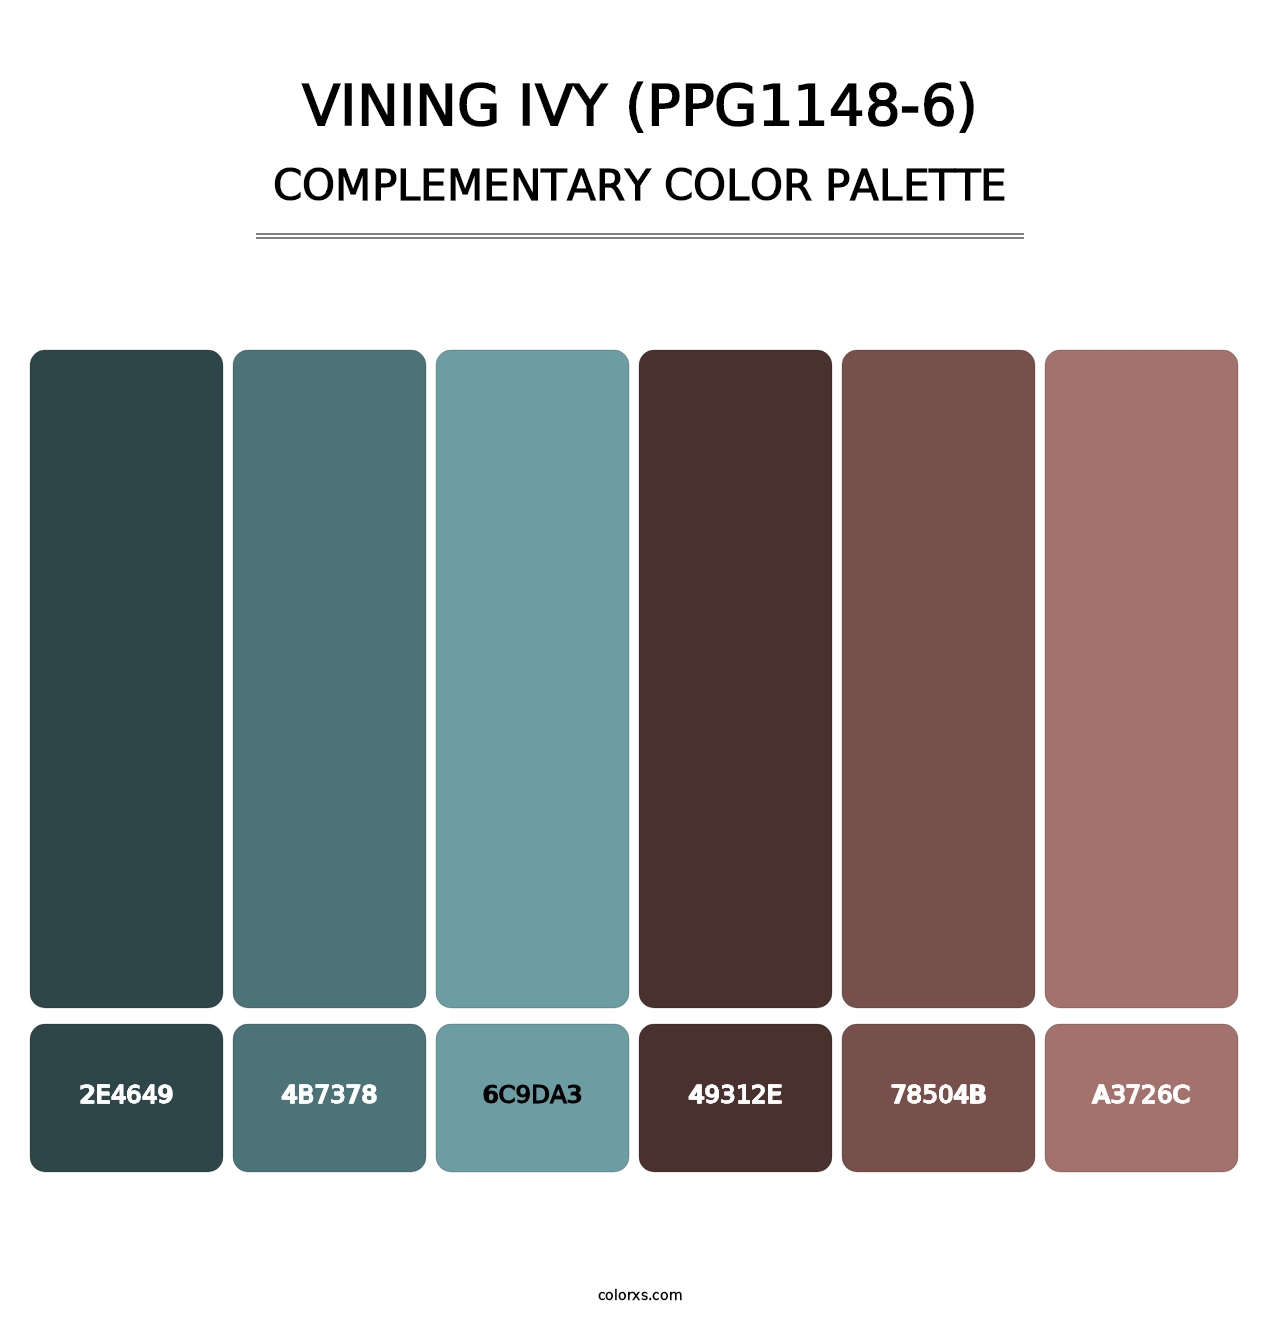 Vining Ivy (PPG1148-6) - Complementary Color Palette